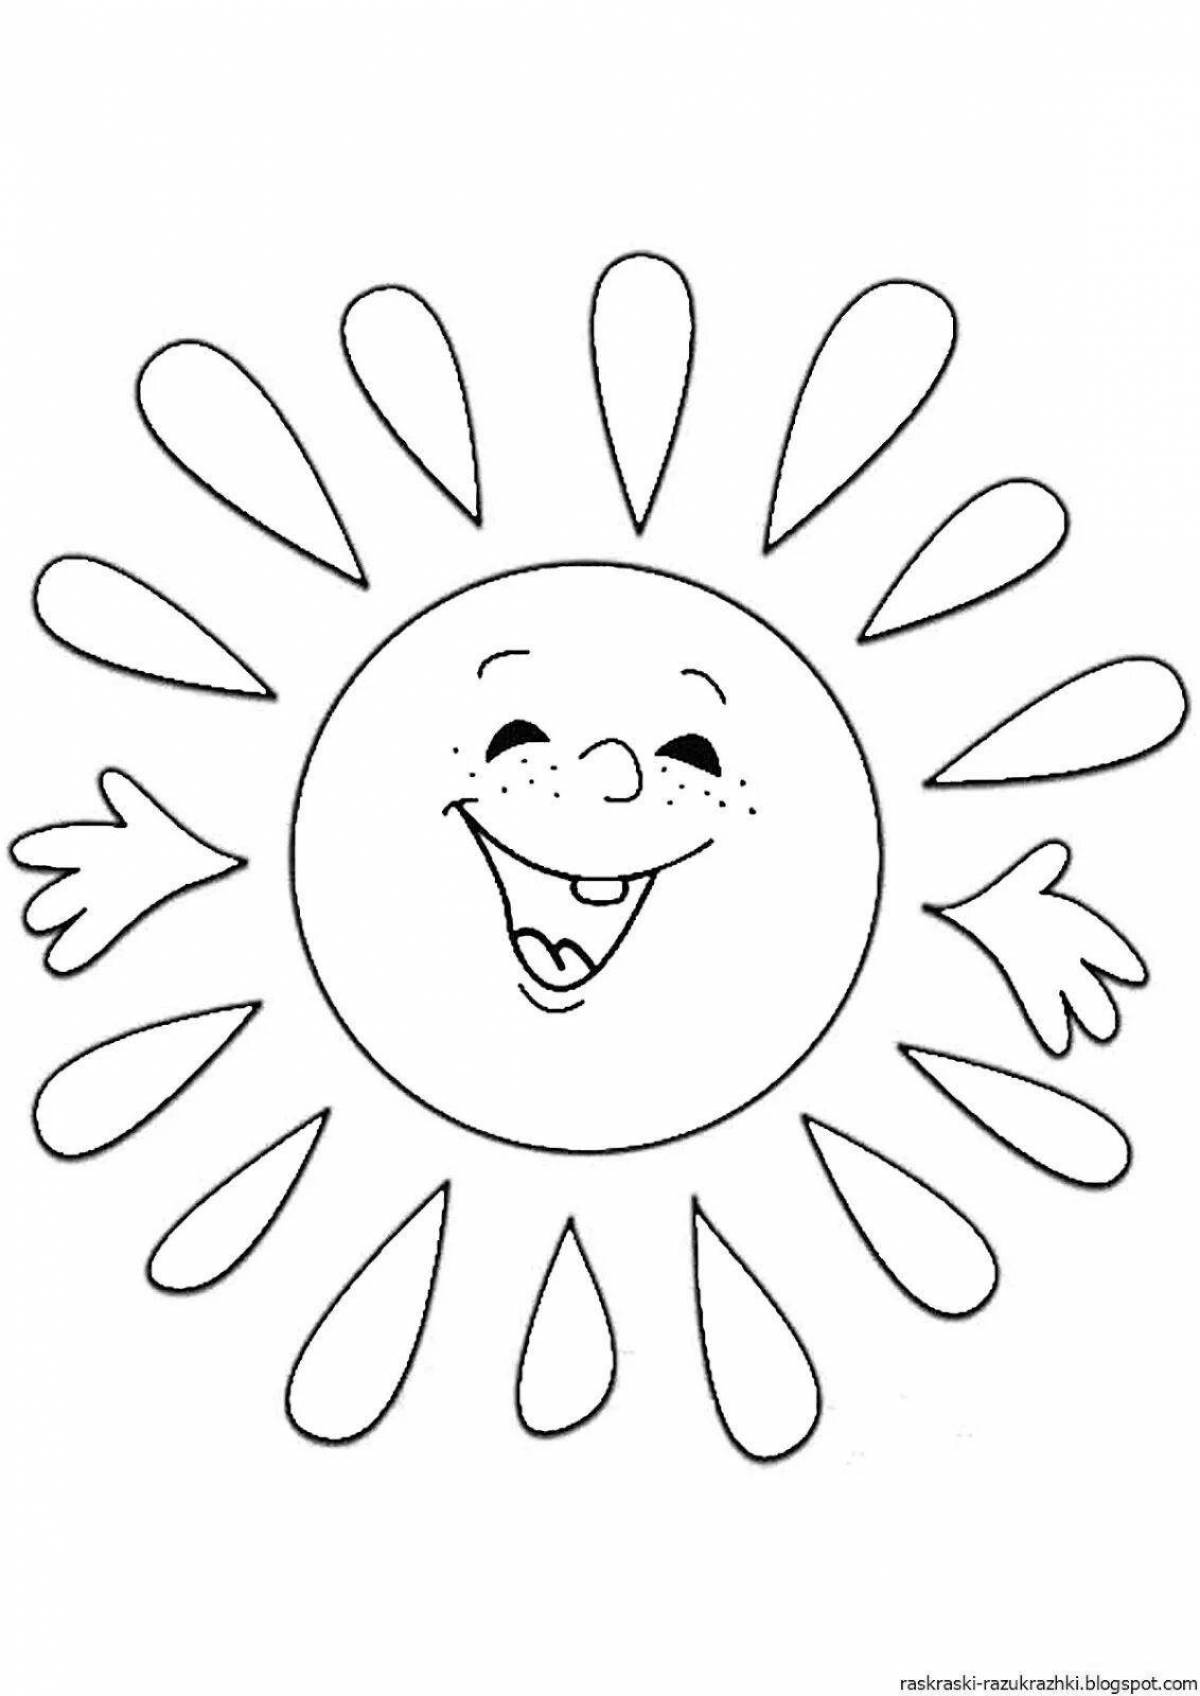 Radiant coloring sun for children 3-4 years old